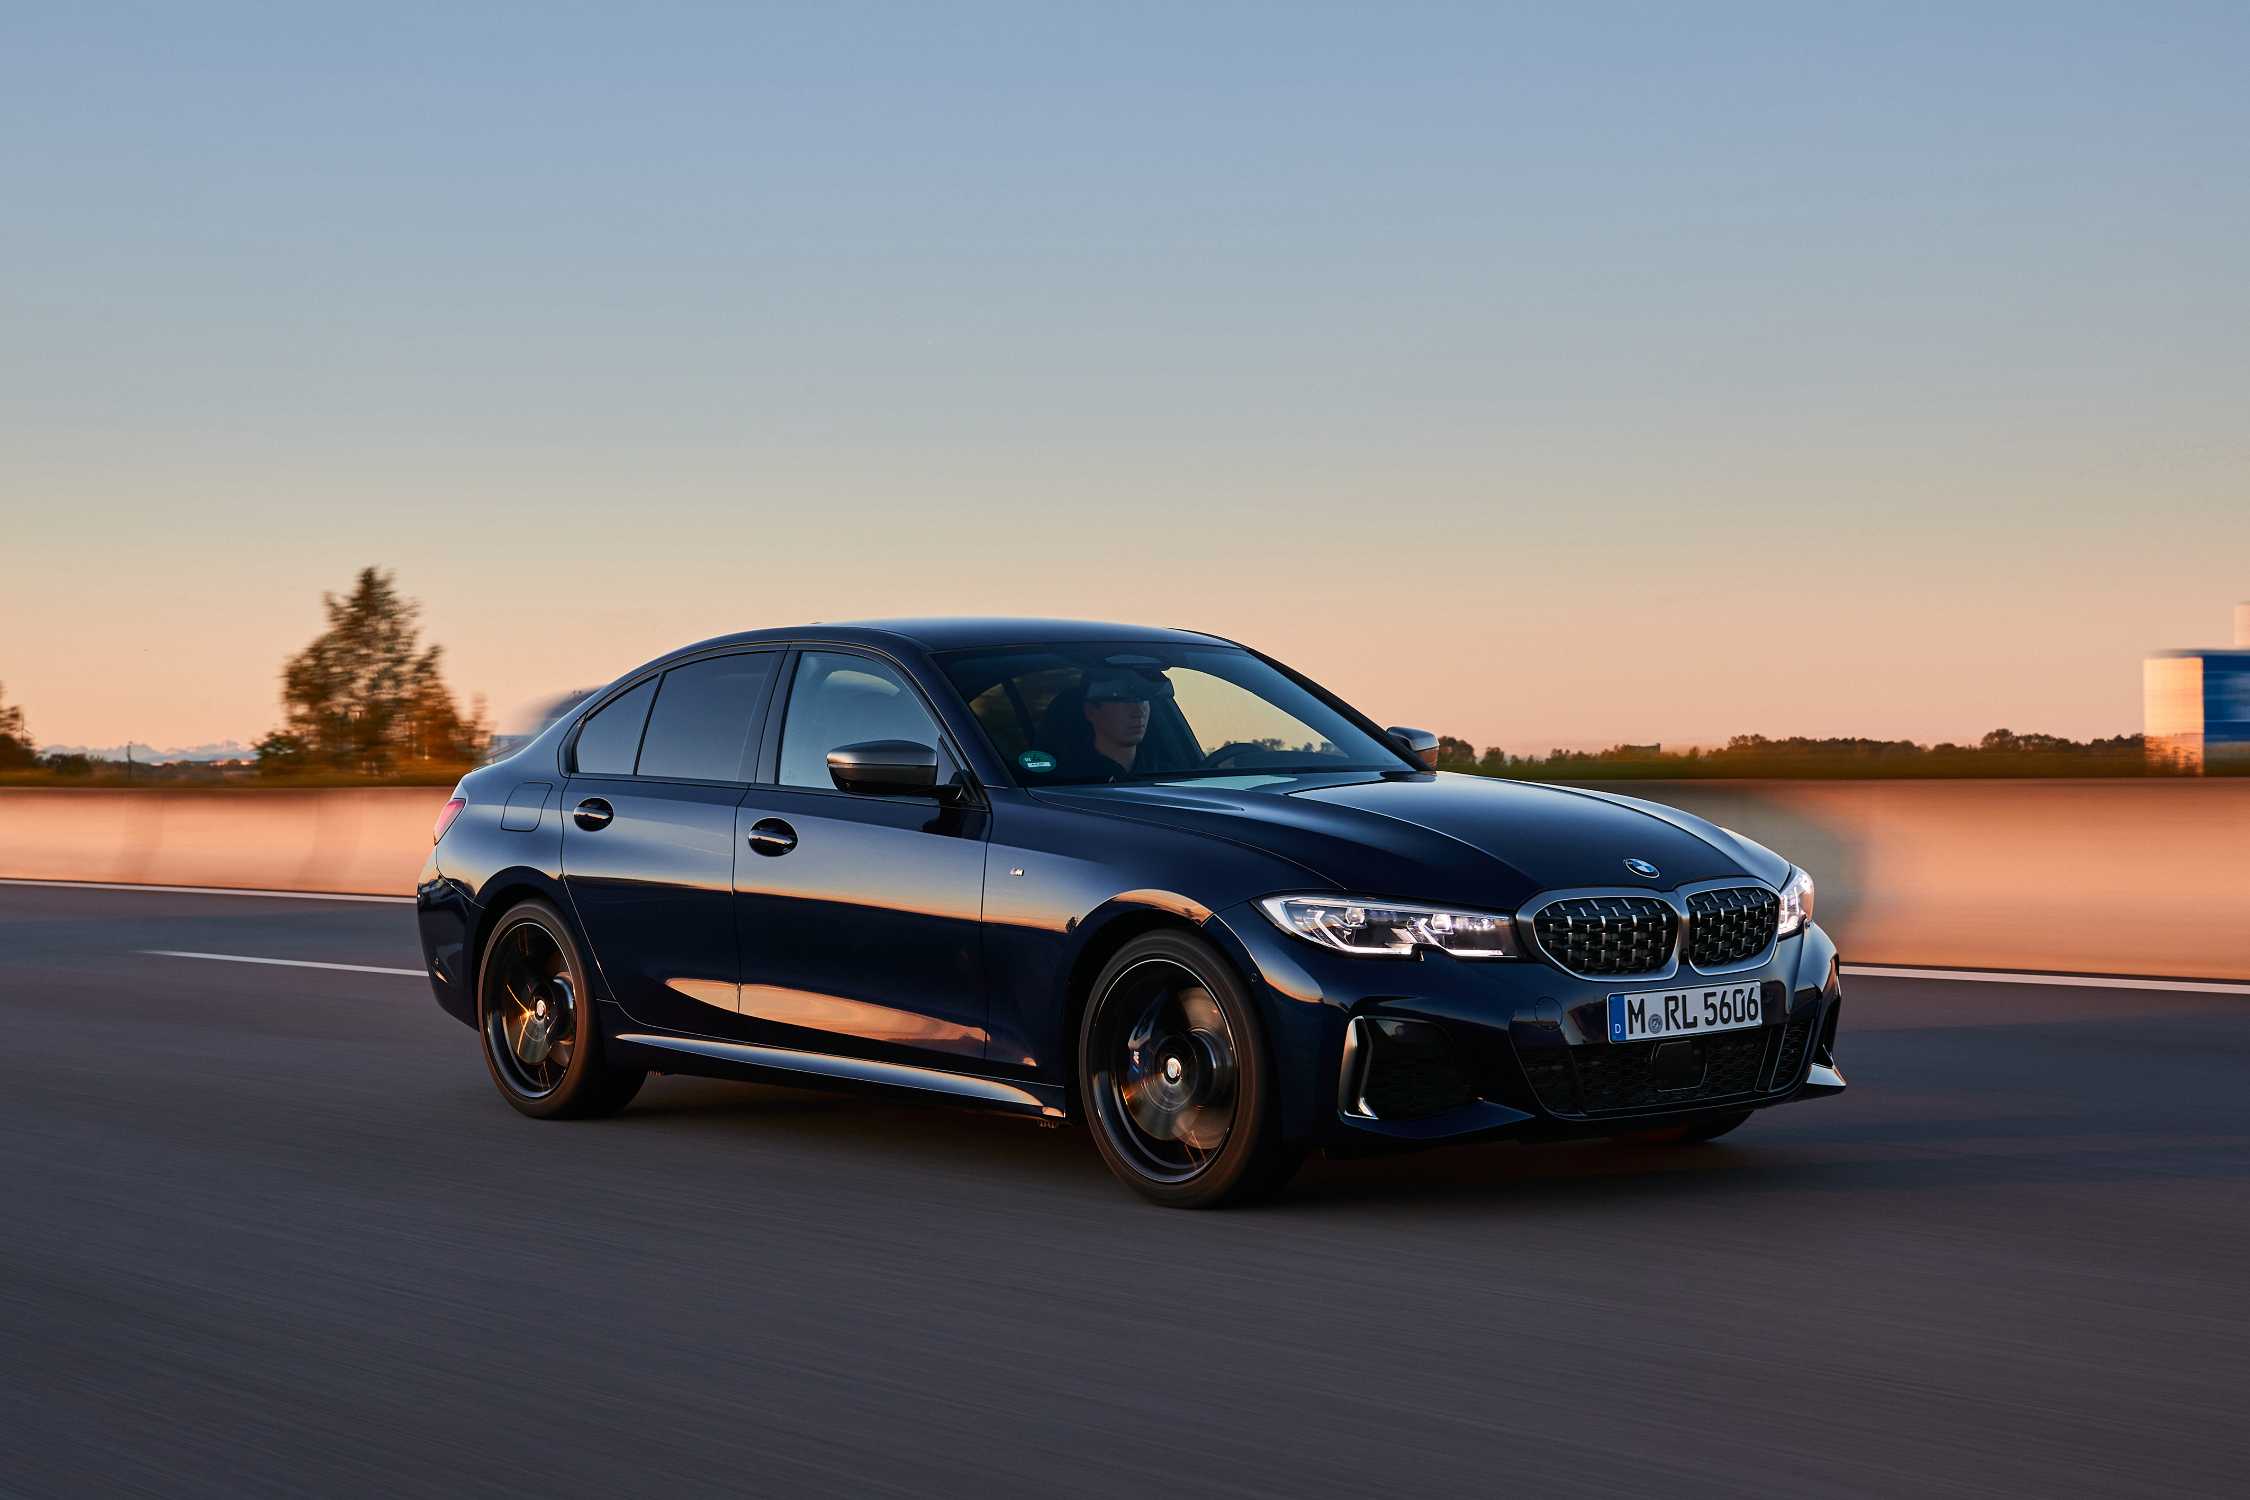 The new BMW M340i xDrive Sedan now available in Singapore.